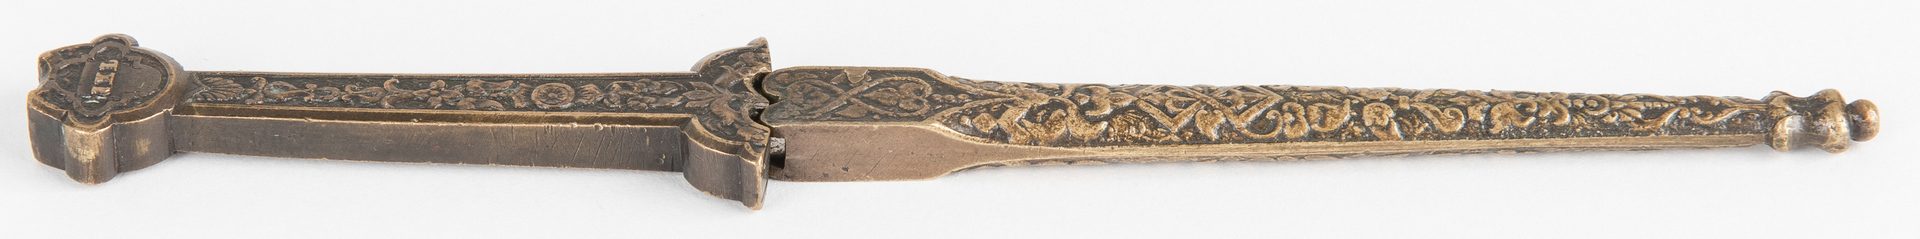 Lot 789: 4 19th/20th Cent. American or European Knives